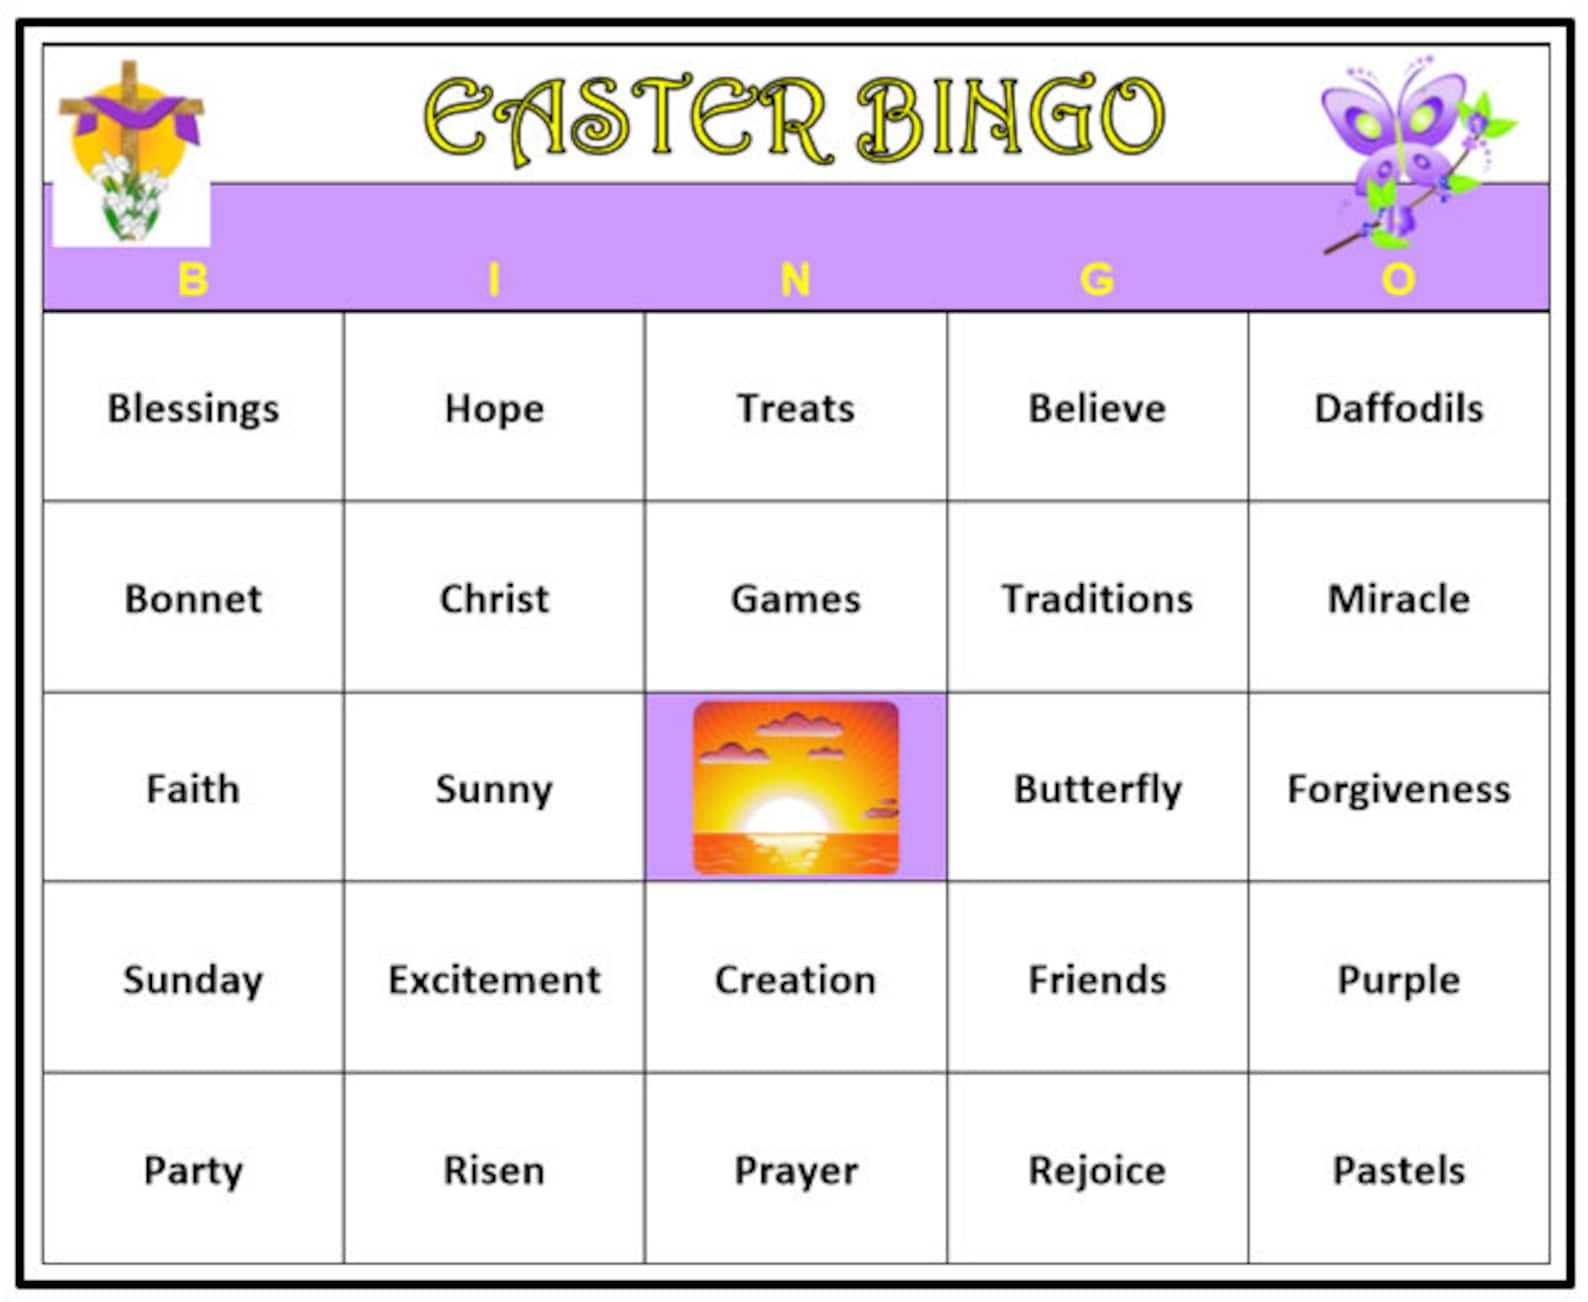 christian-easter-party-bingo-game-60-cards-easter-theme-etsy